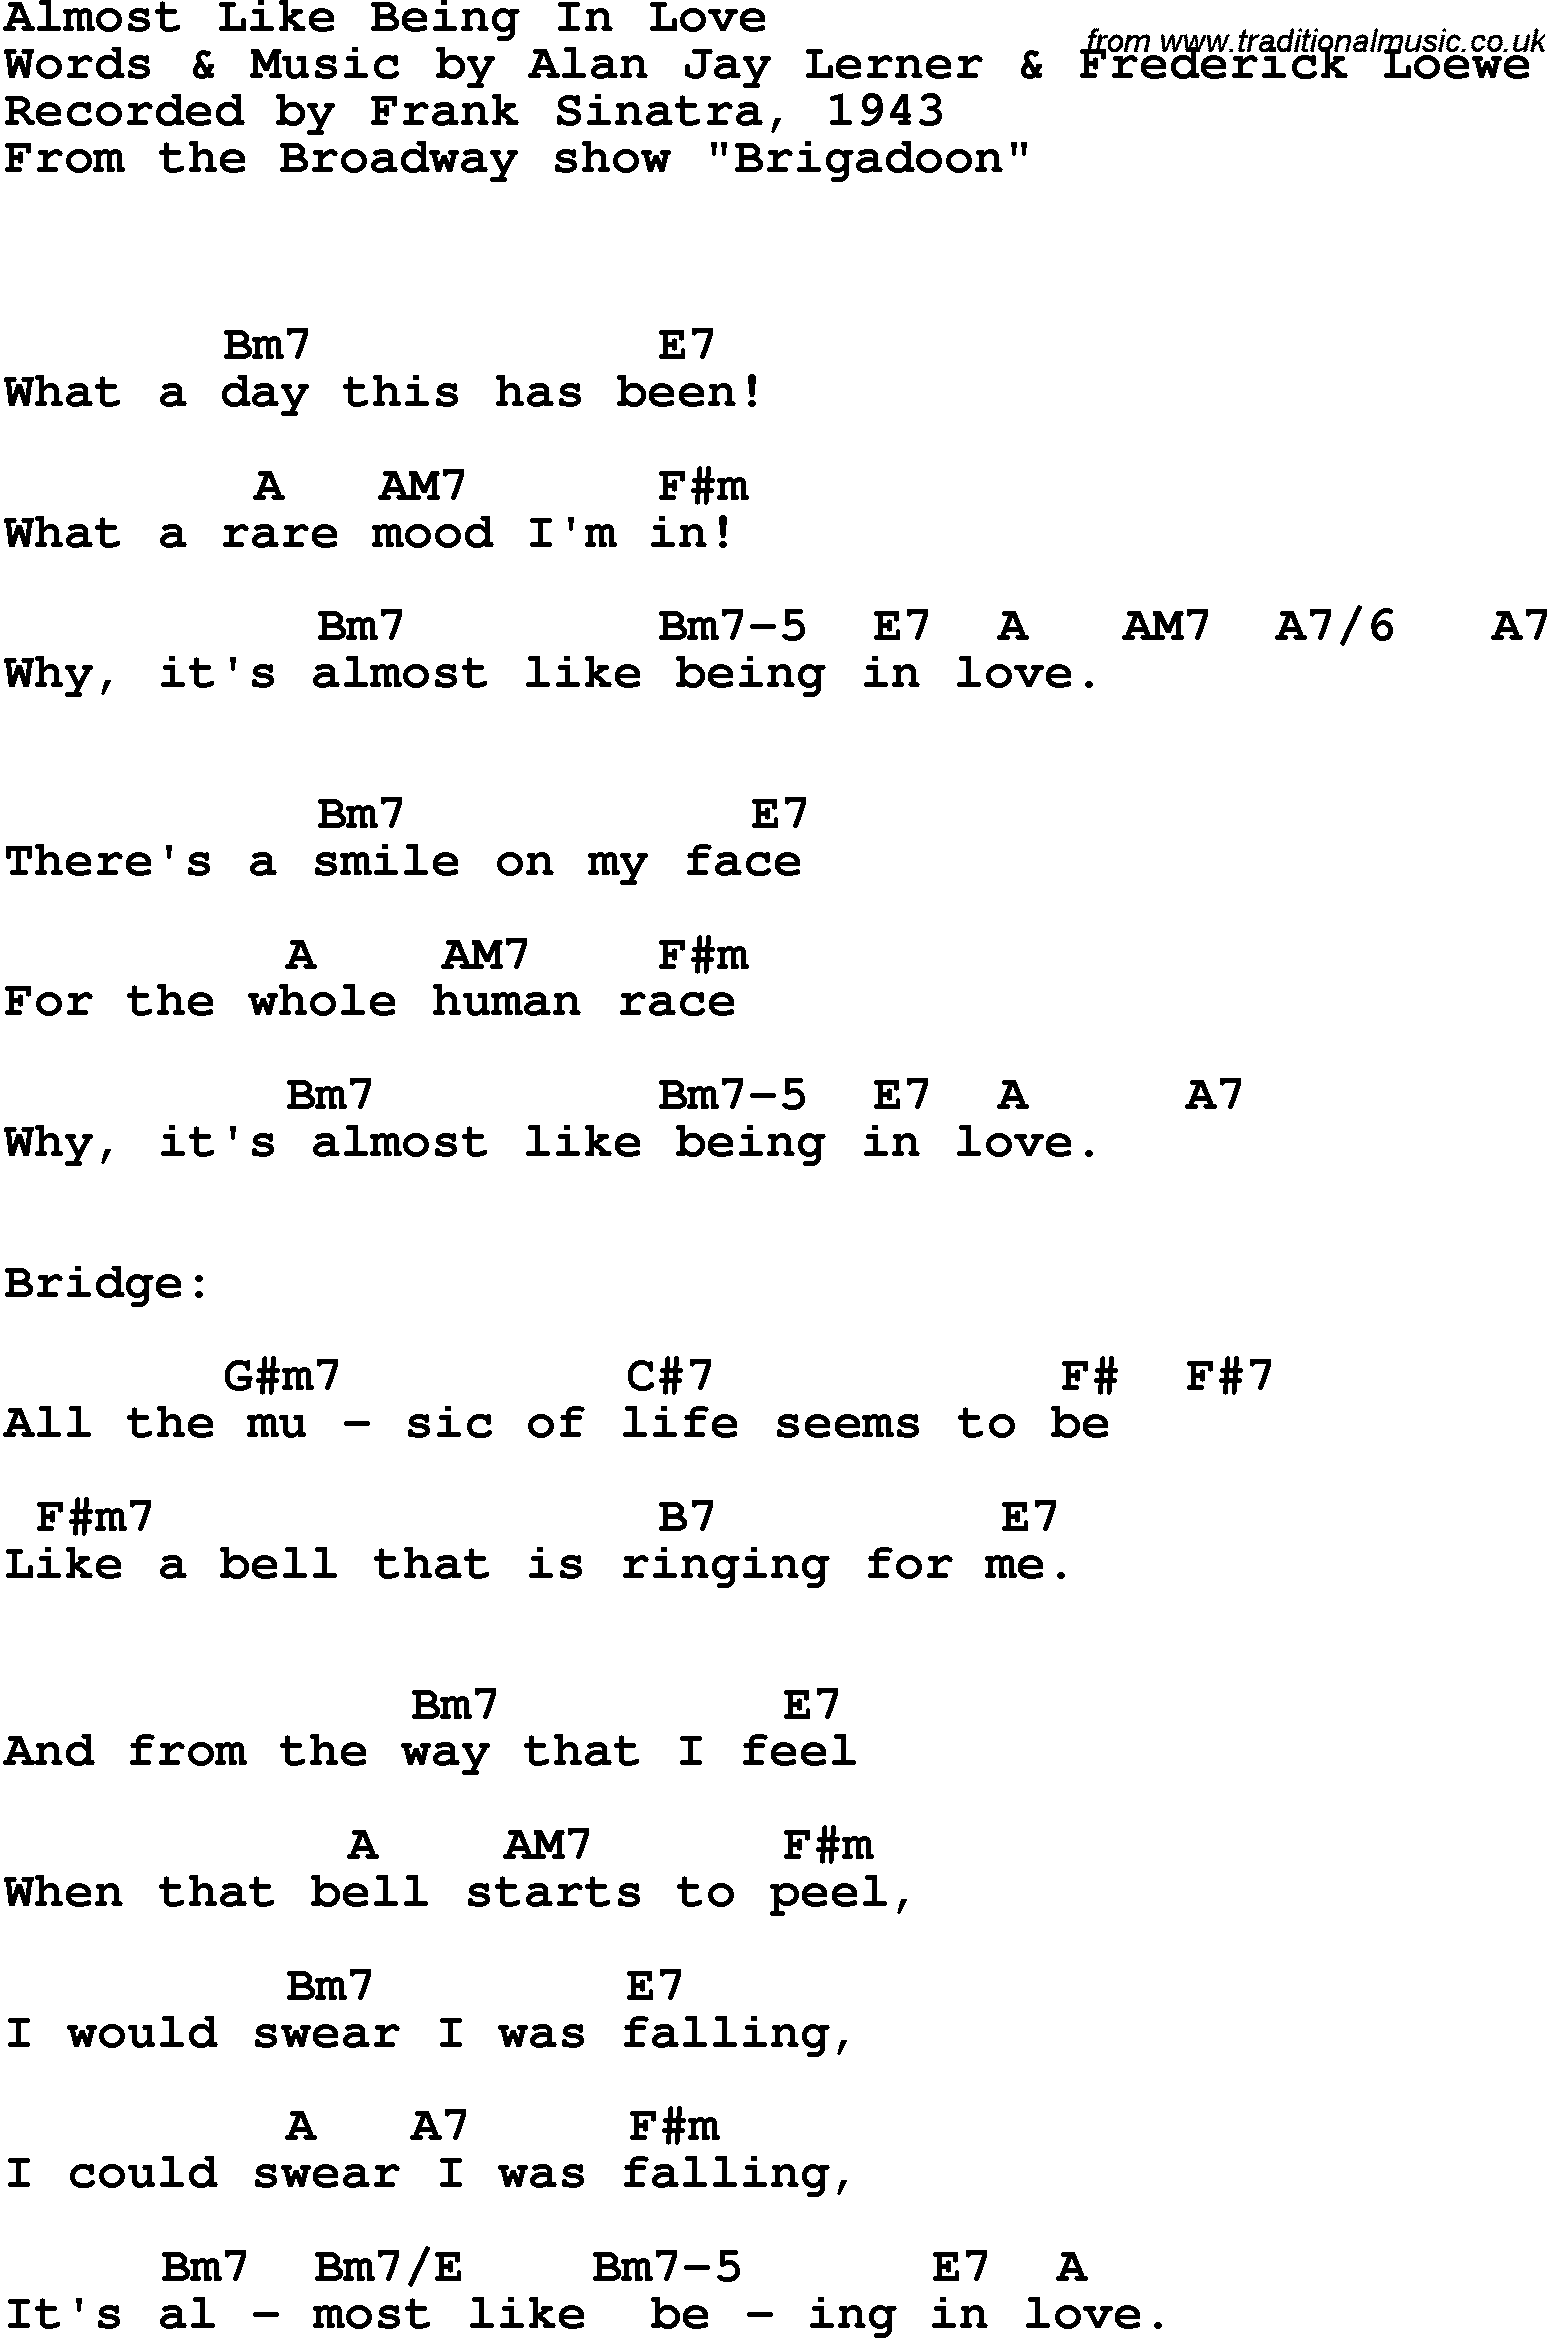 Song Lyrics with guitar chords for Almost Like Being In Love - Frank Sinatra, 1943